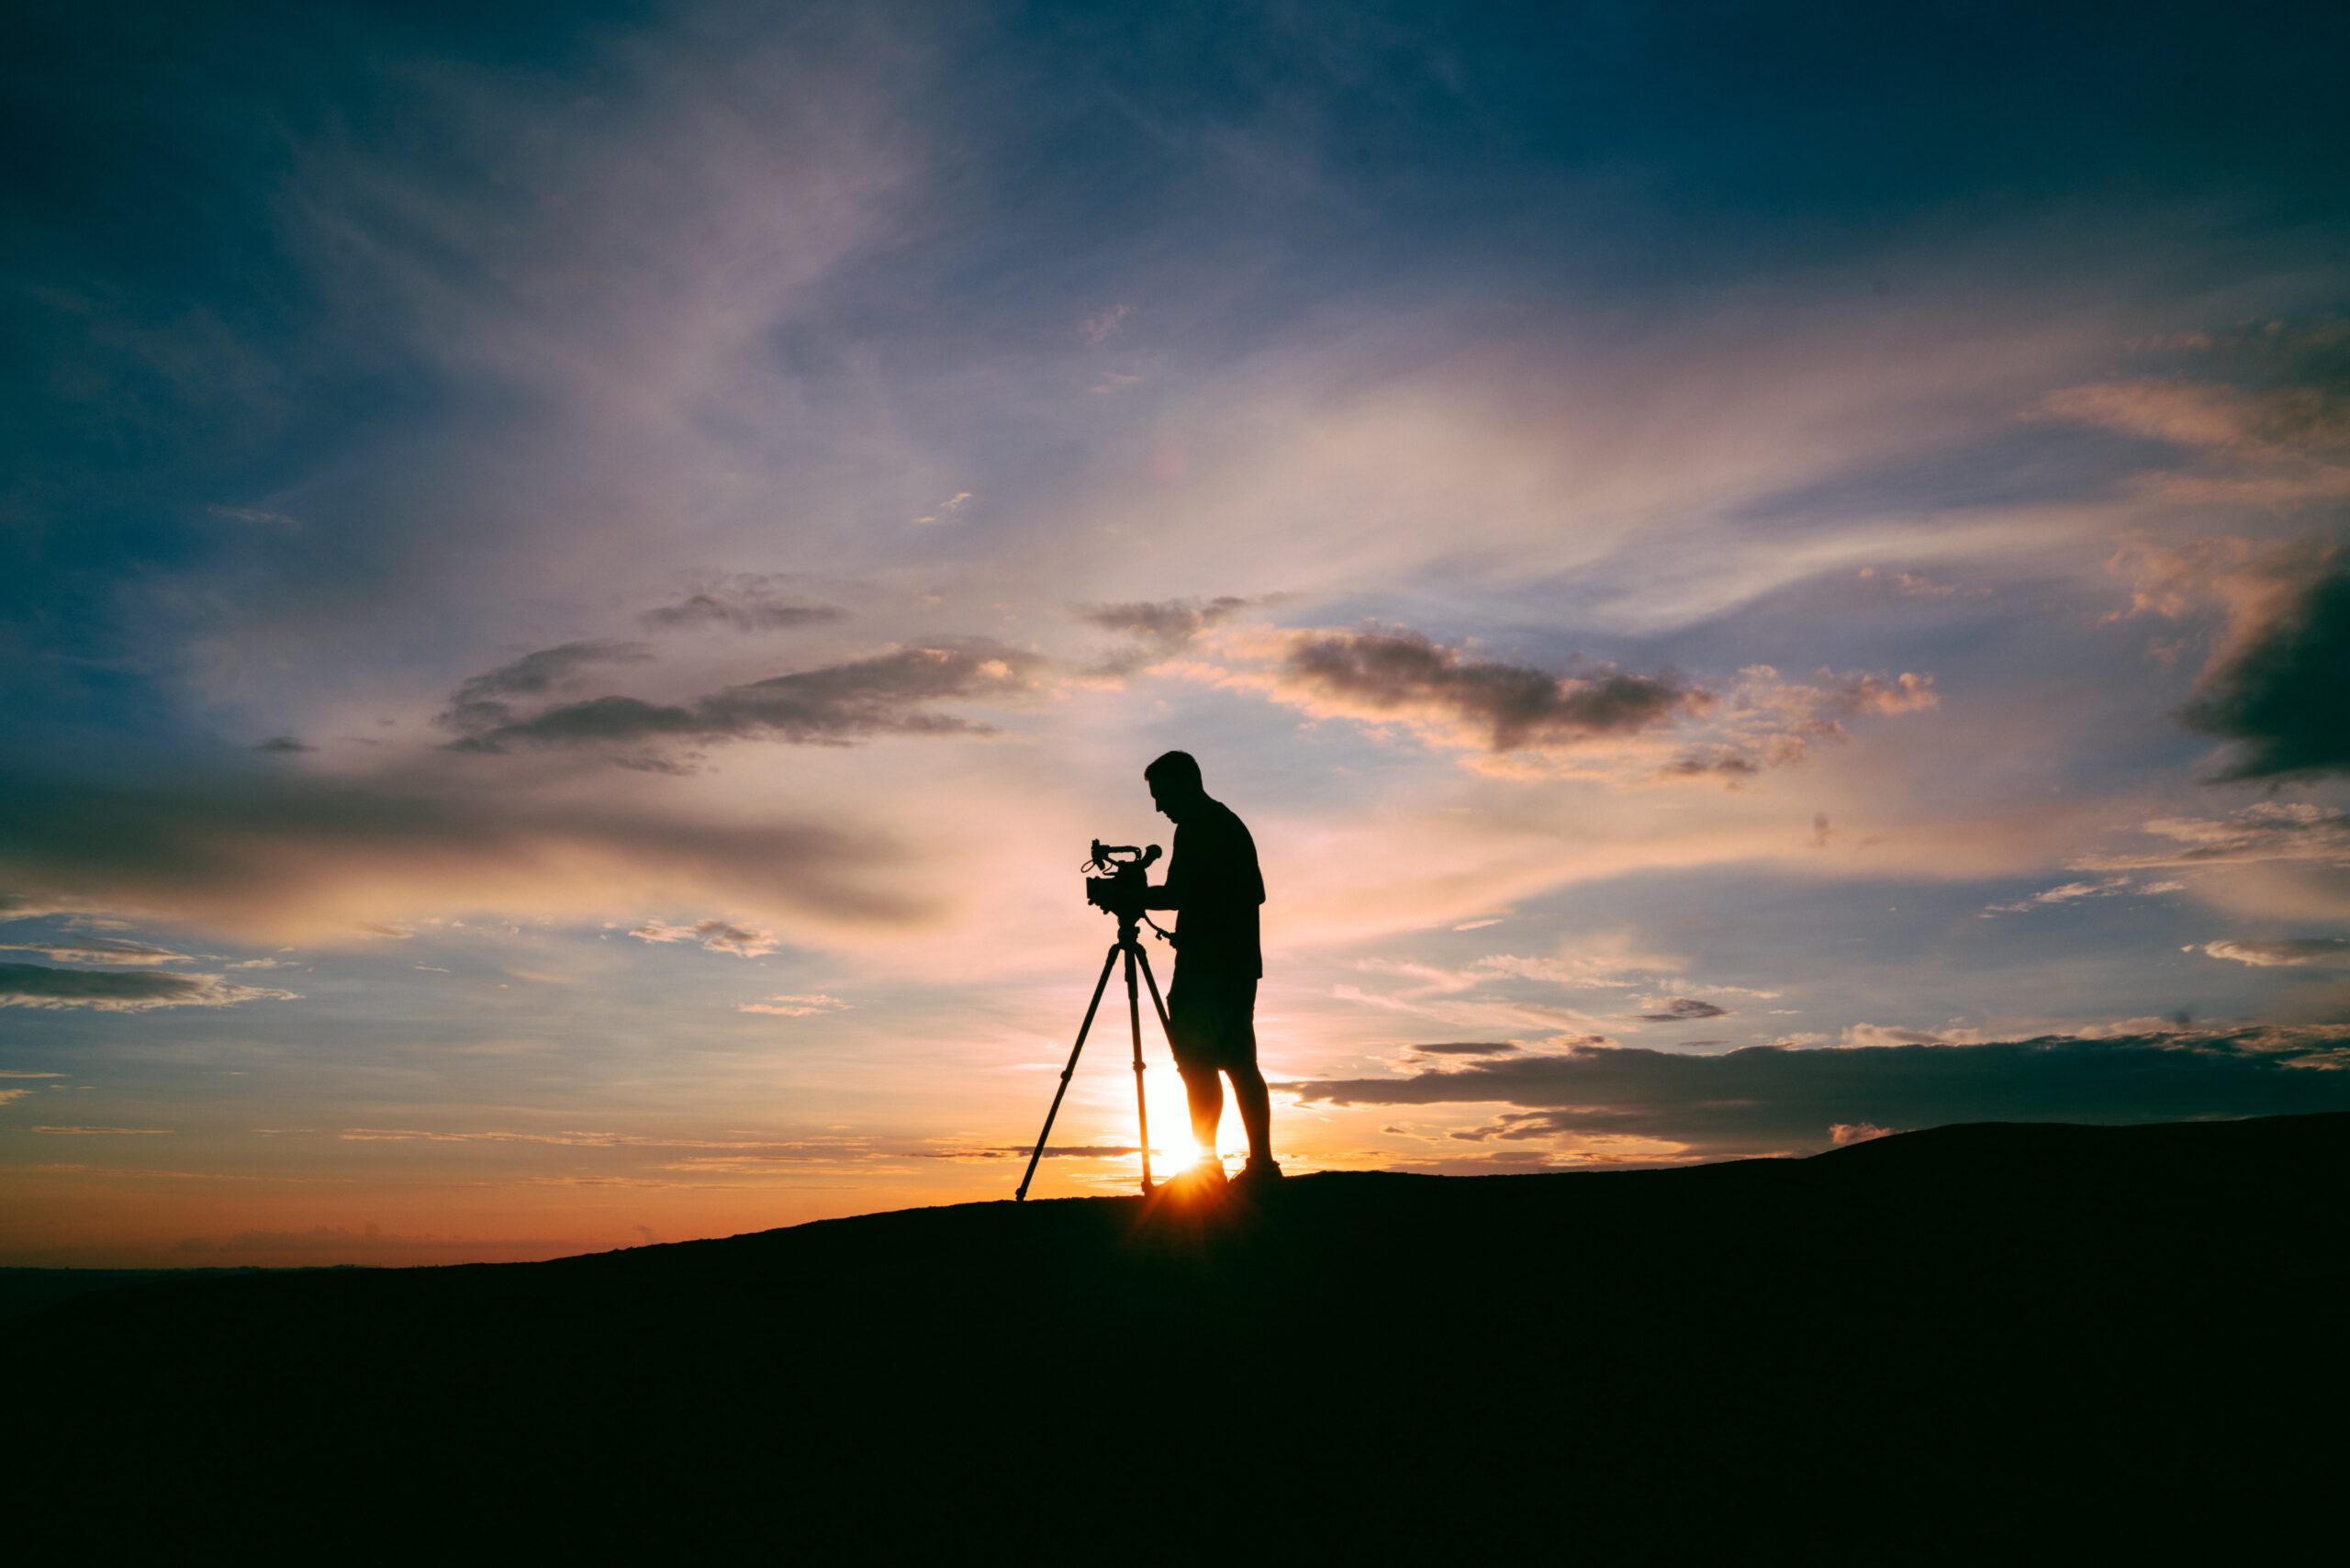 How To Capture The Perfect Shot: 7 Photography Tips For Complete Beginners